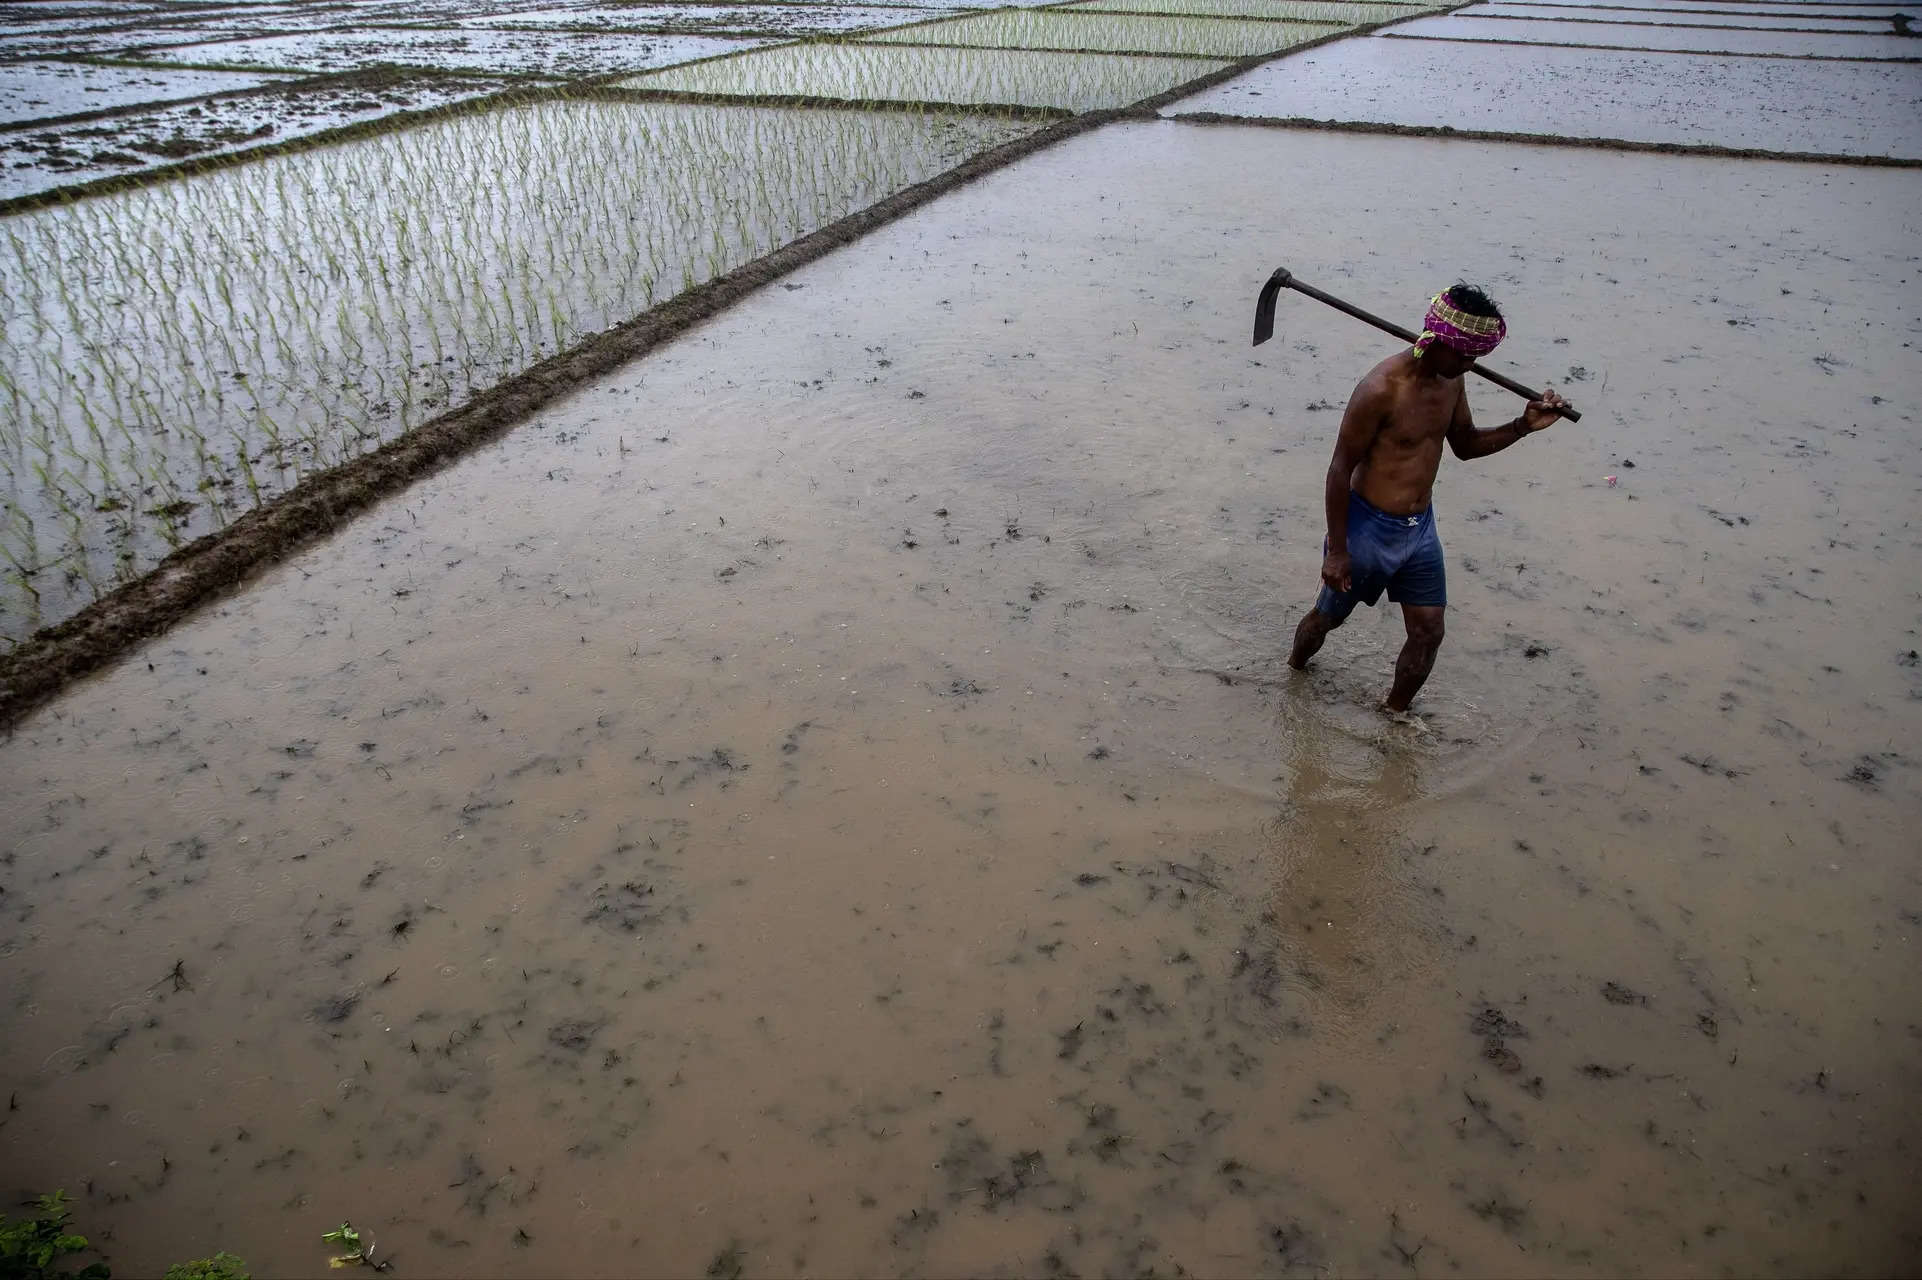 The worrying changes in India’s monsoon patterns have implications for everything from agriculture to health